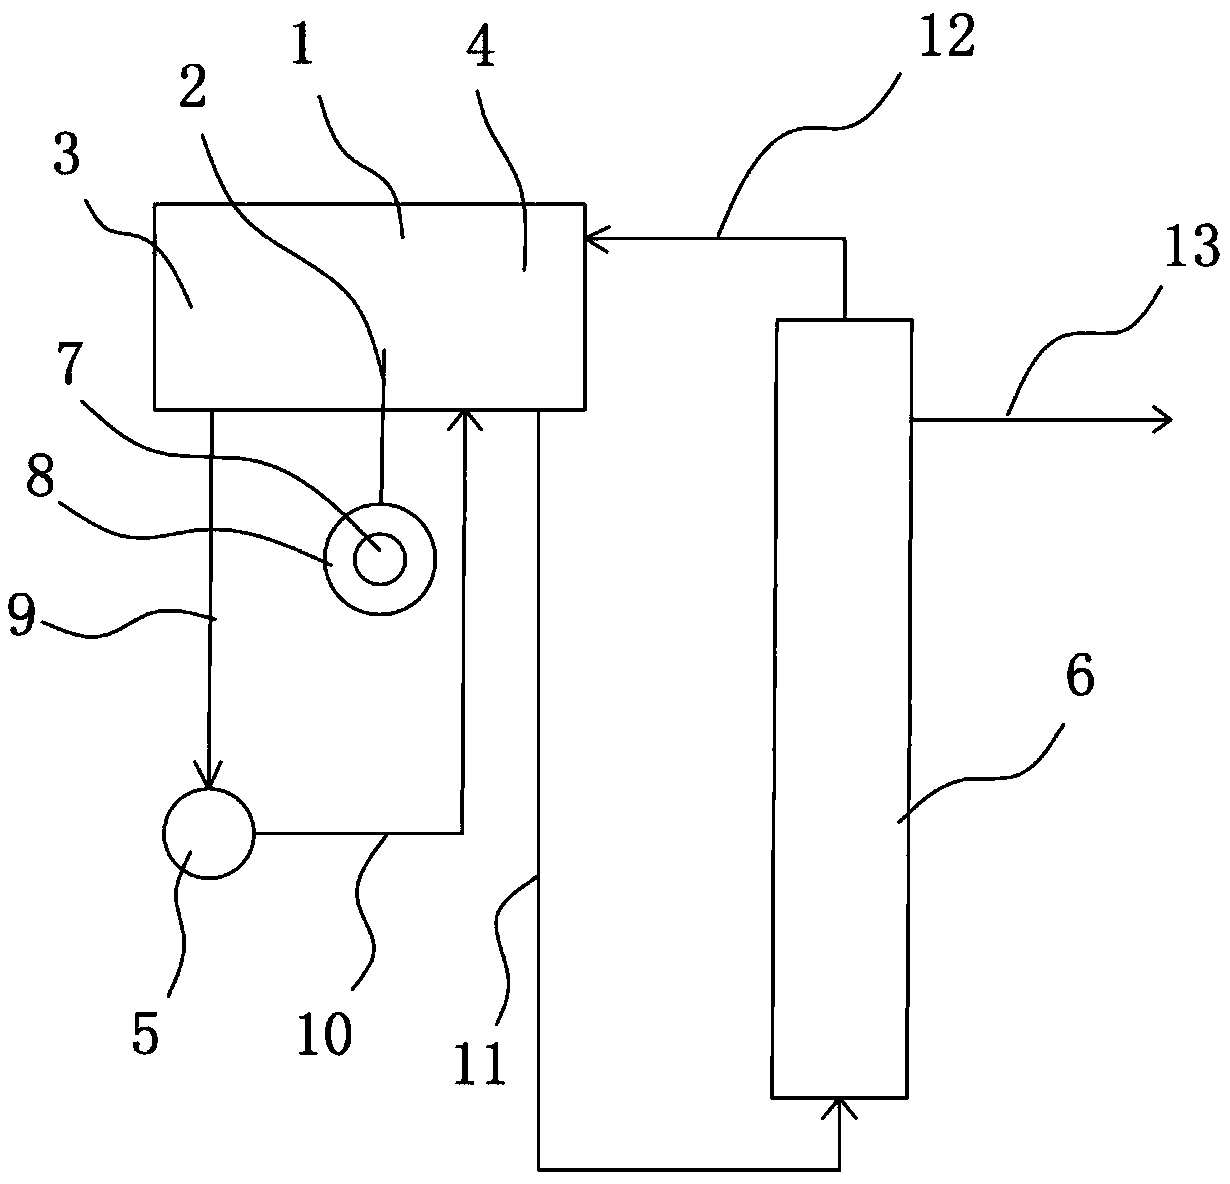 Control method for water heating equipment